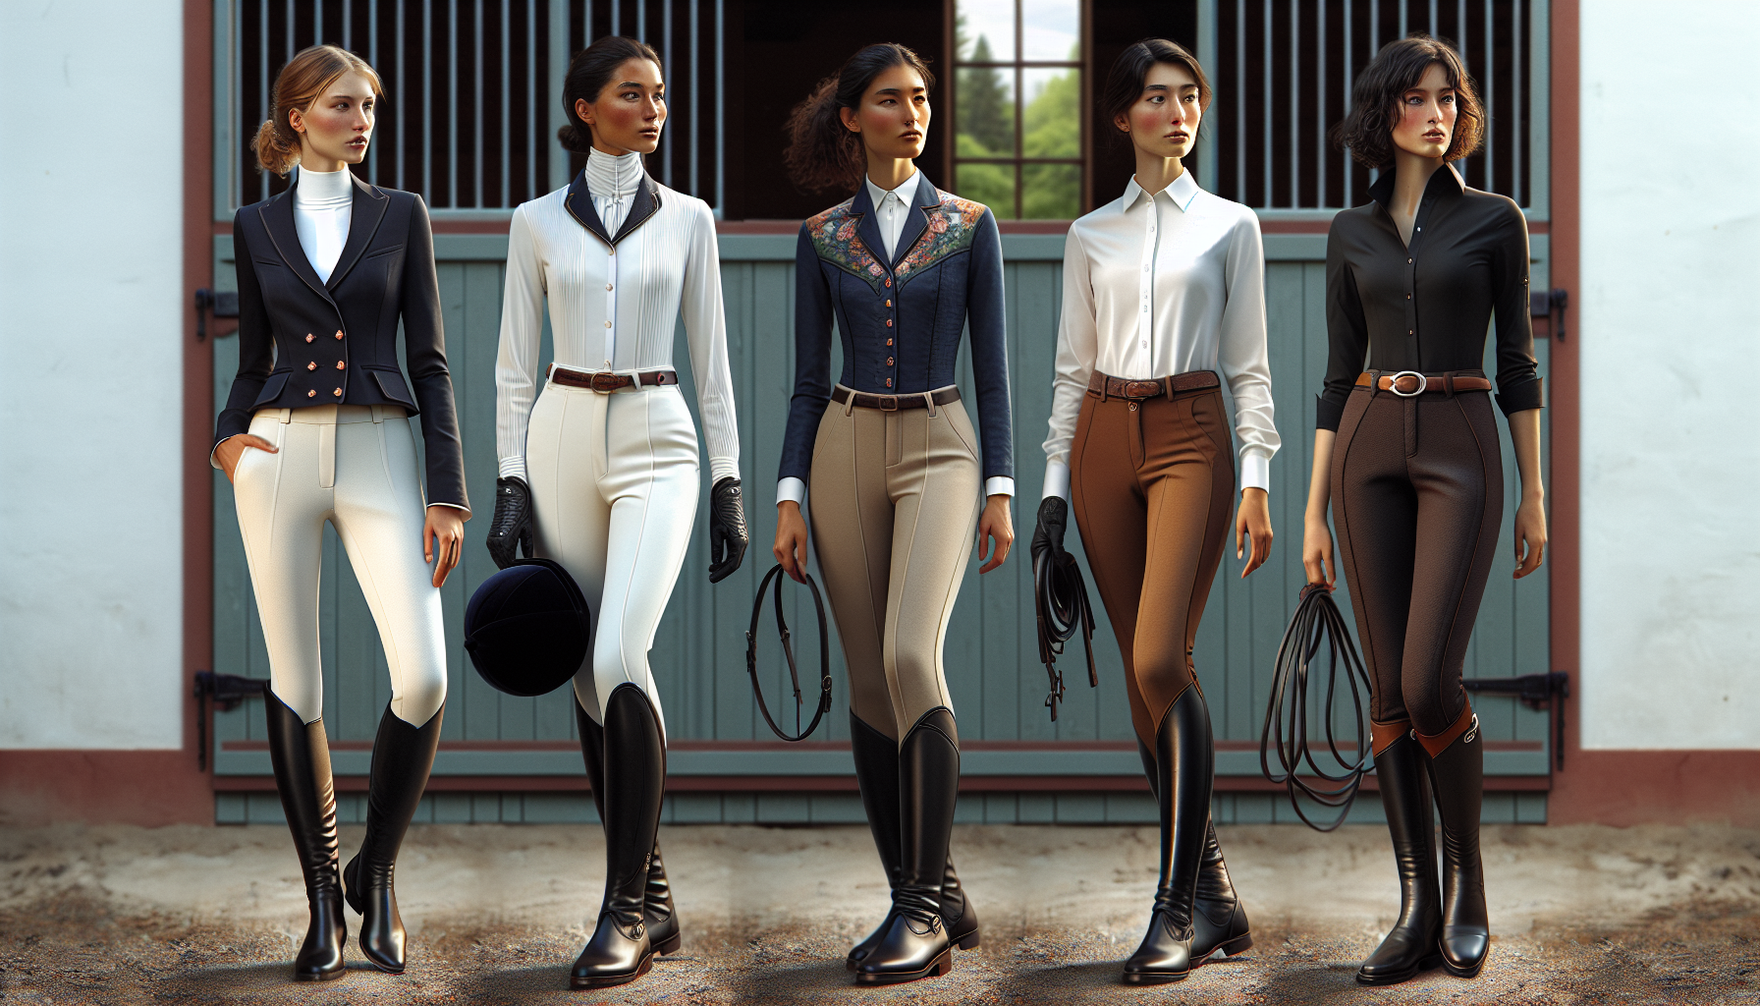 Five essential equestrian outfits for women riders set against a backdrop of a traditional stable. Outfit one is sported by a White woman in her 20s, showcasing a classic riding jacket, jodhpurs and p